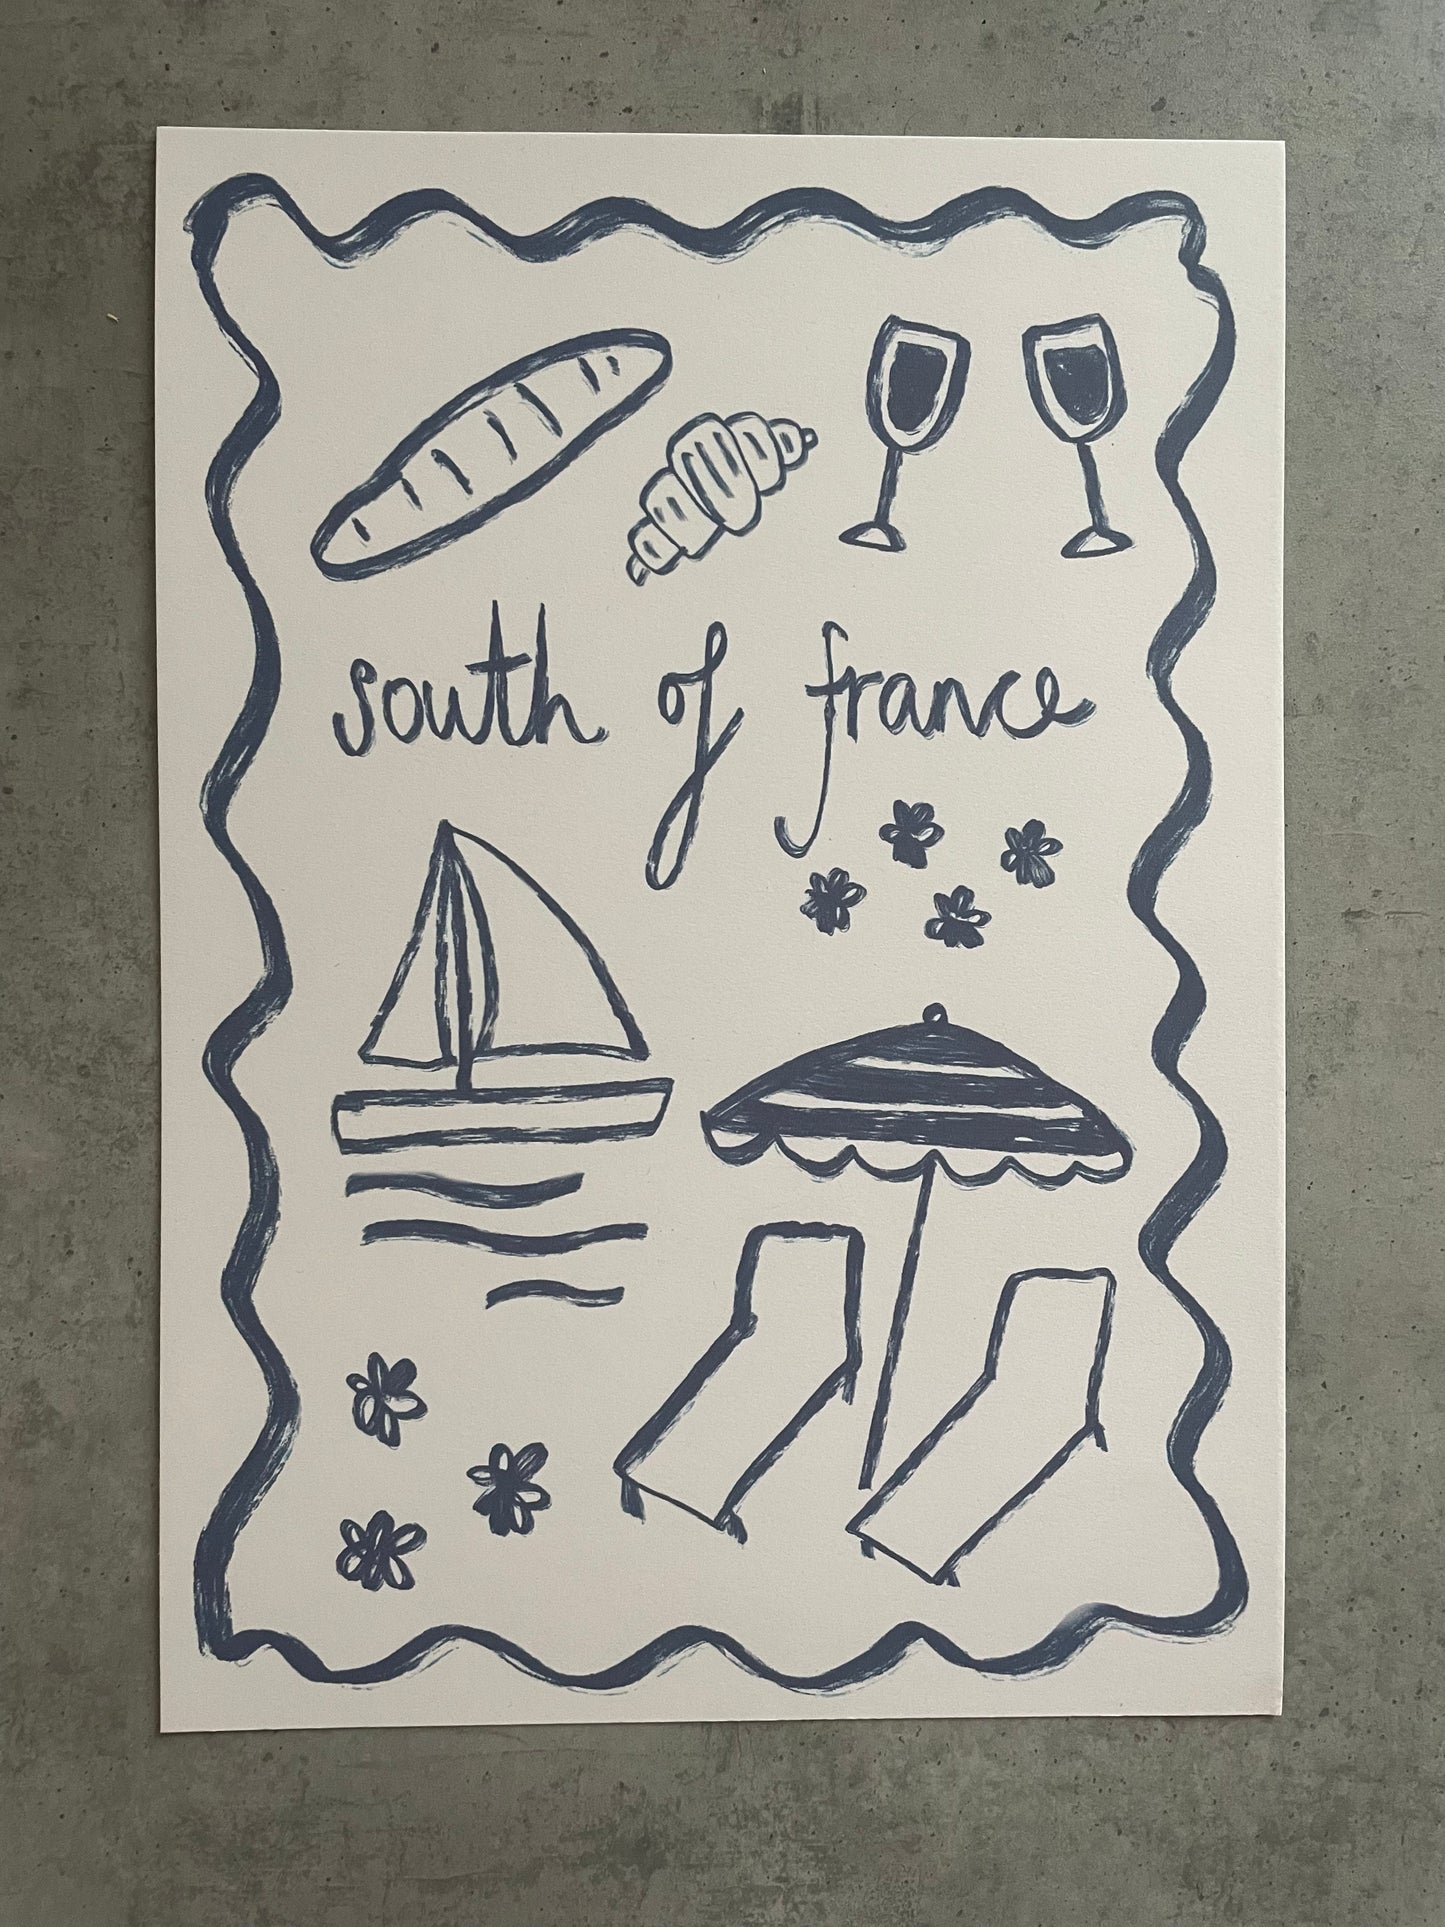 South of France Print